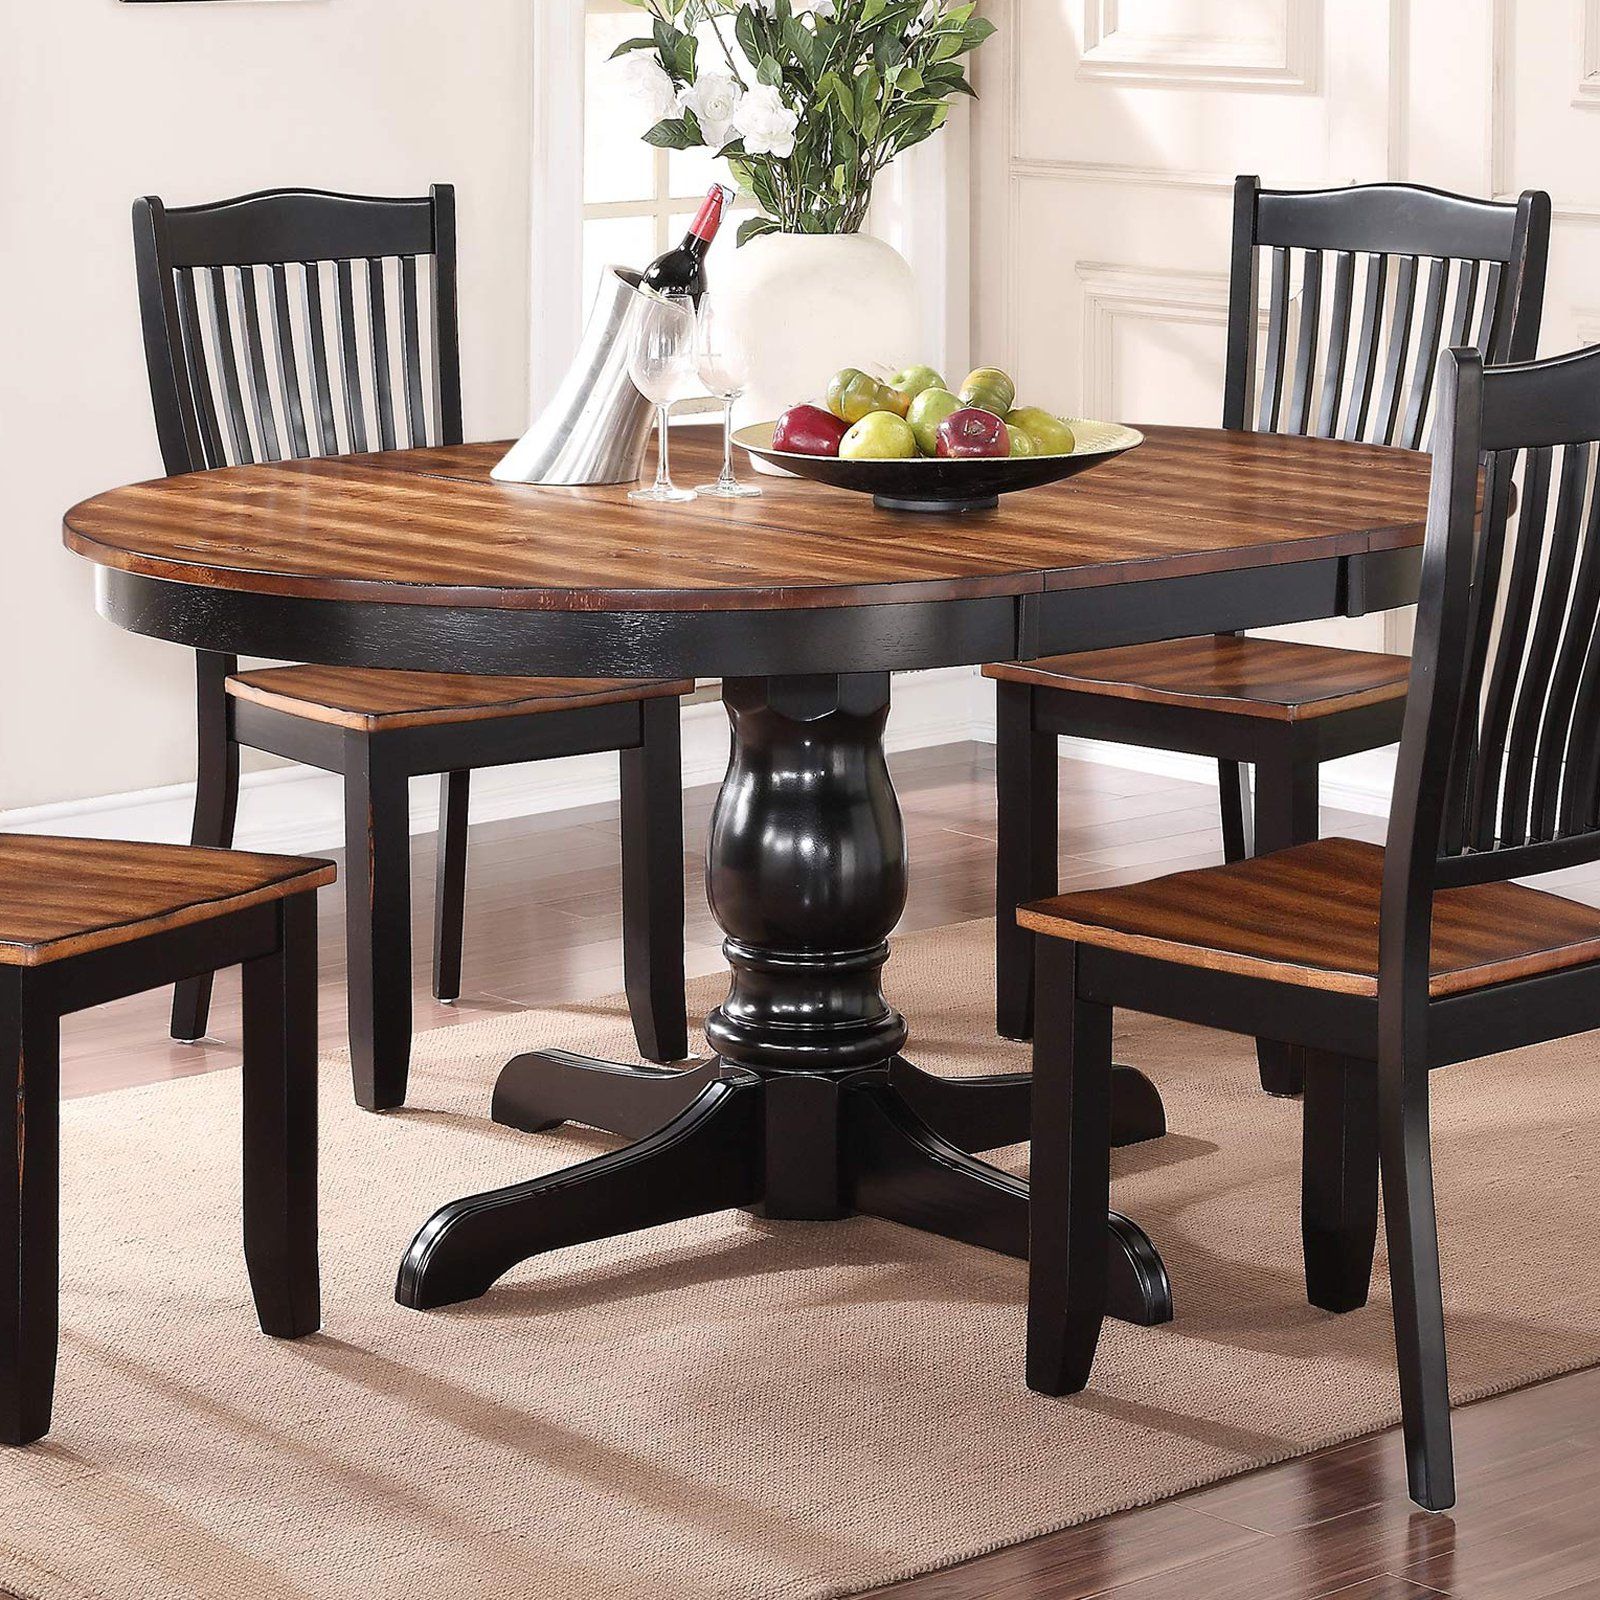 Wes Counter Height Rubberwood Solid Wood Dining Tables Intended For Popular Winners Only Carson Pedestal Table (Gallery 33 of 36)